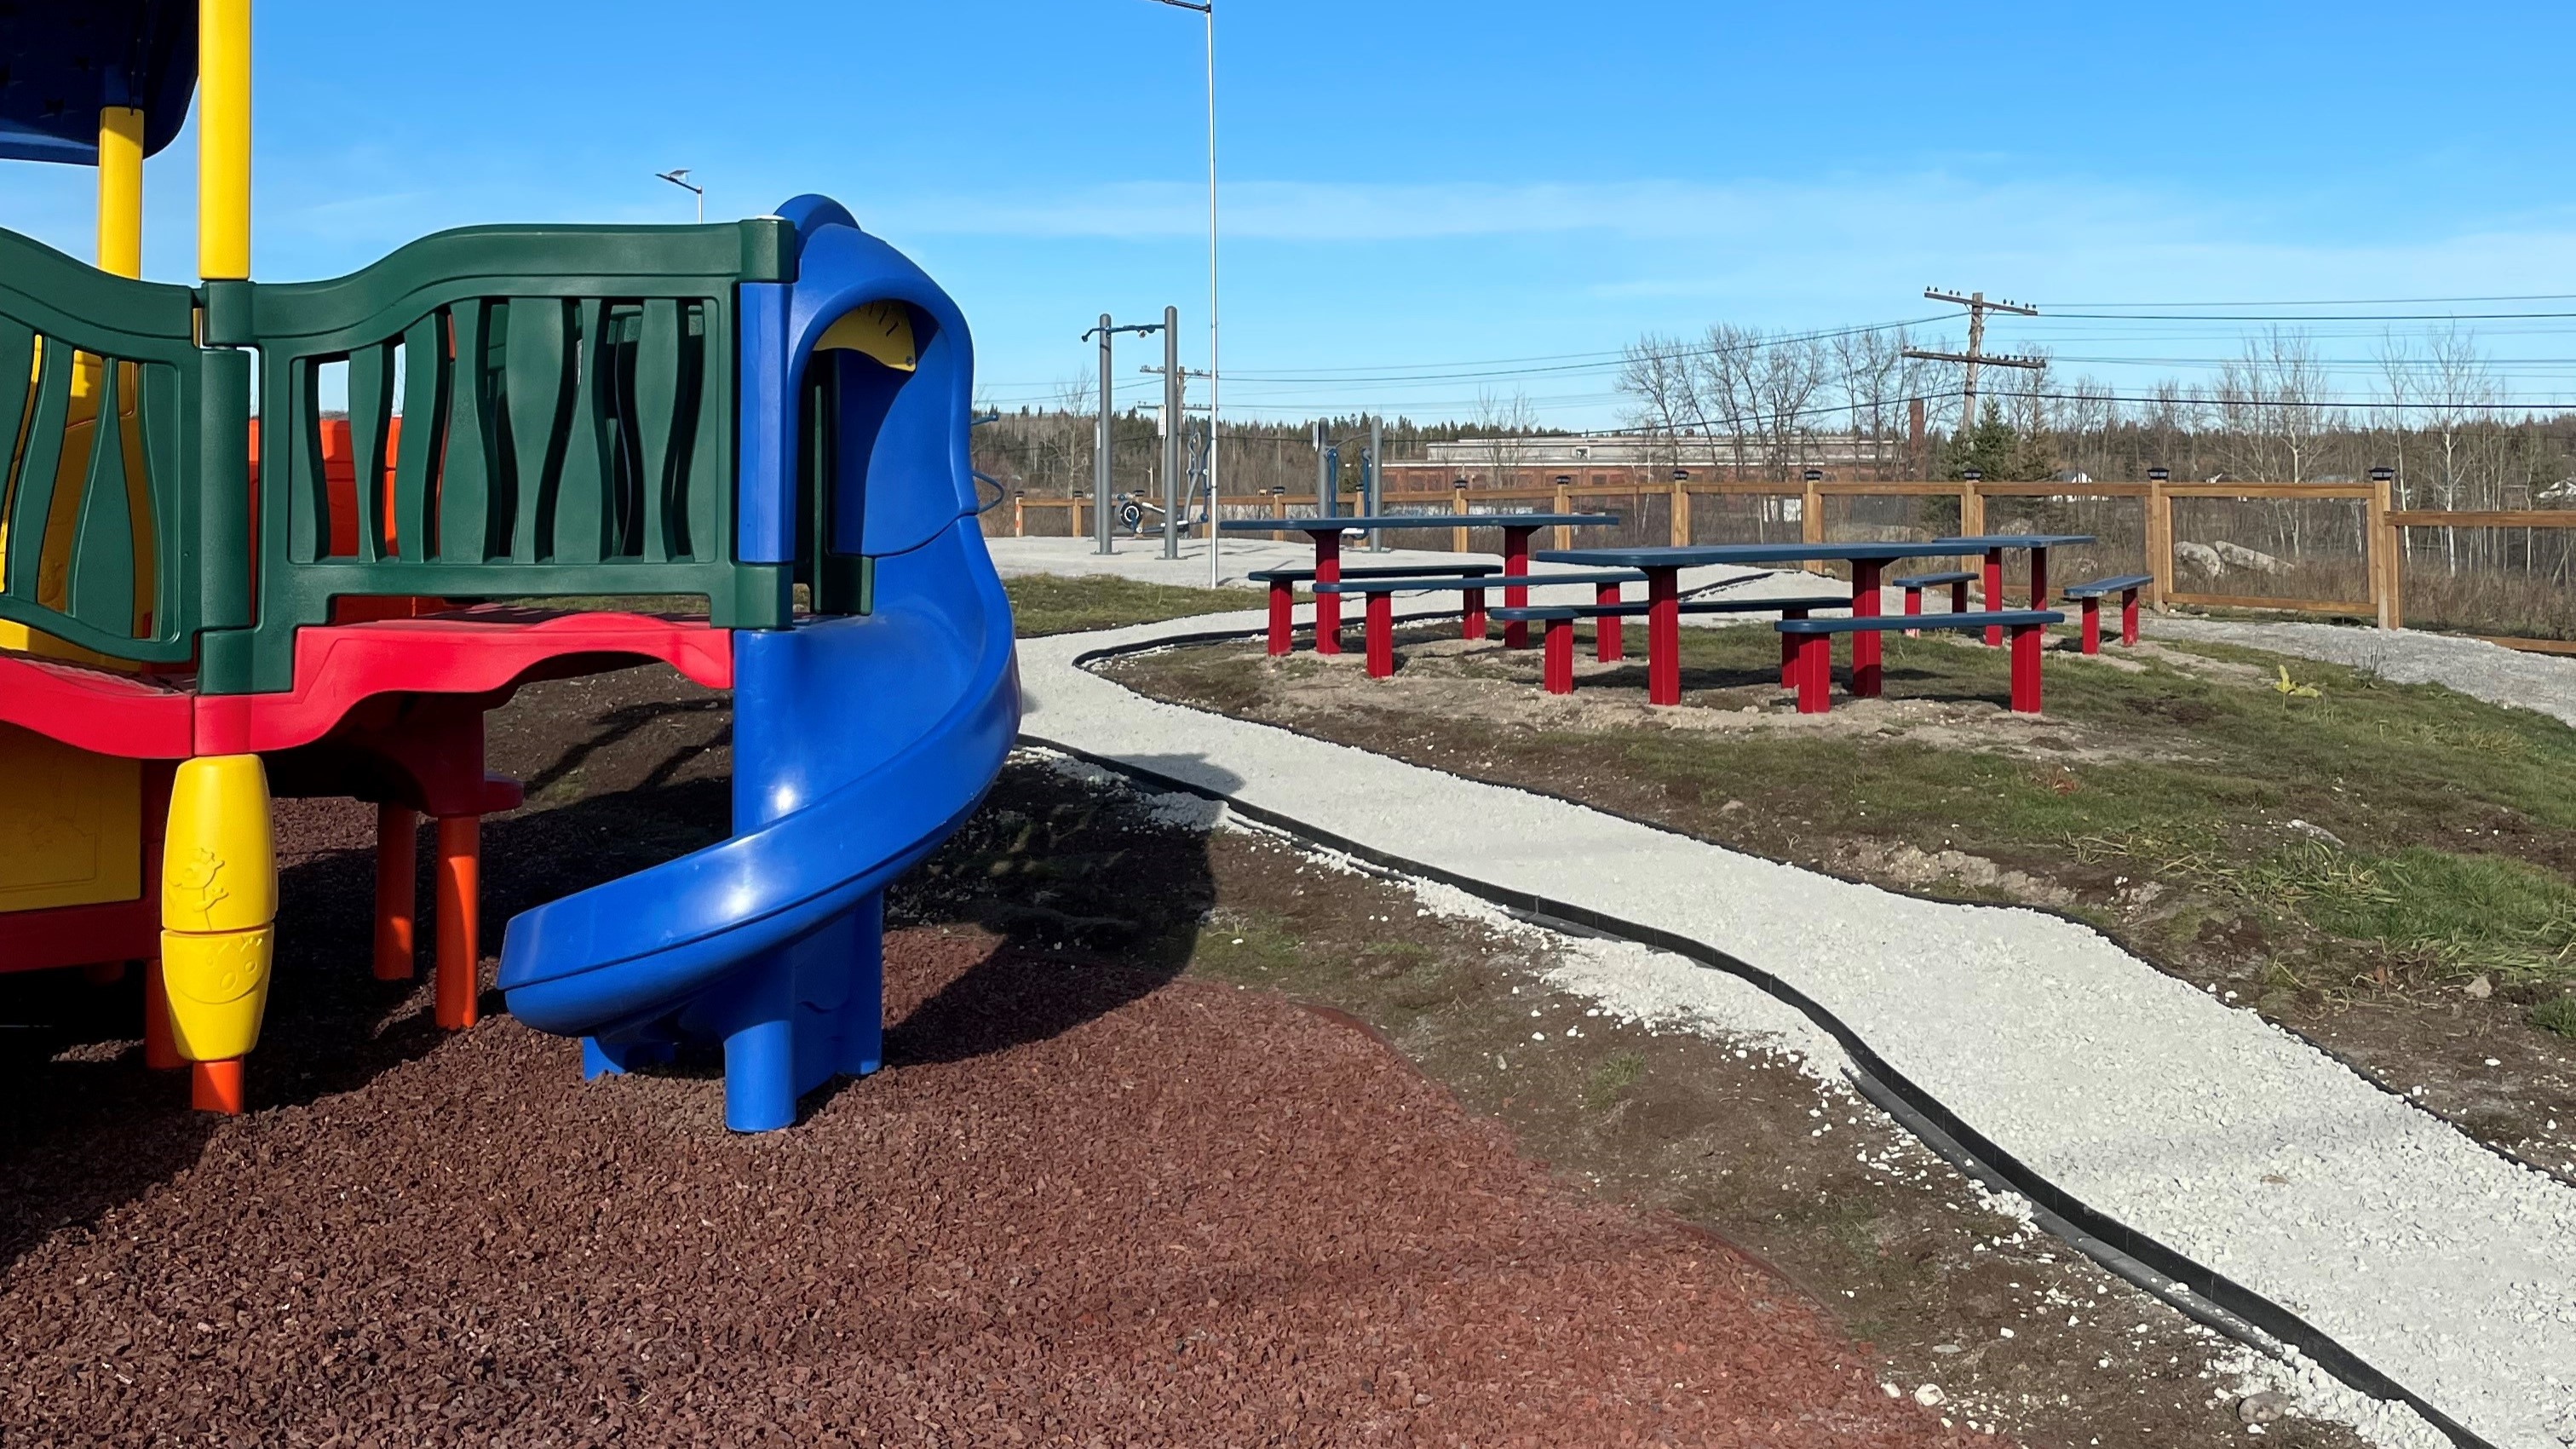 Image of a park, with a play structure in the foreground, and benches in the background. 